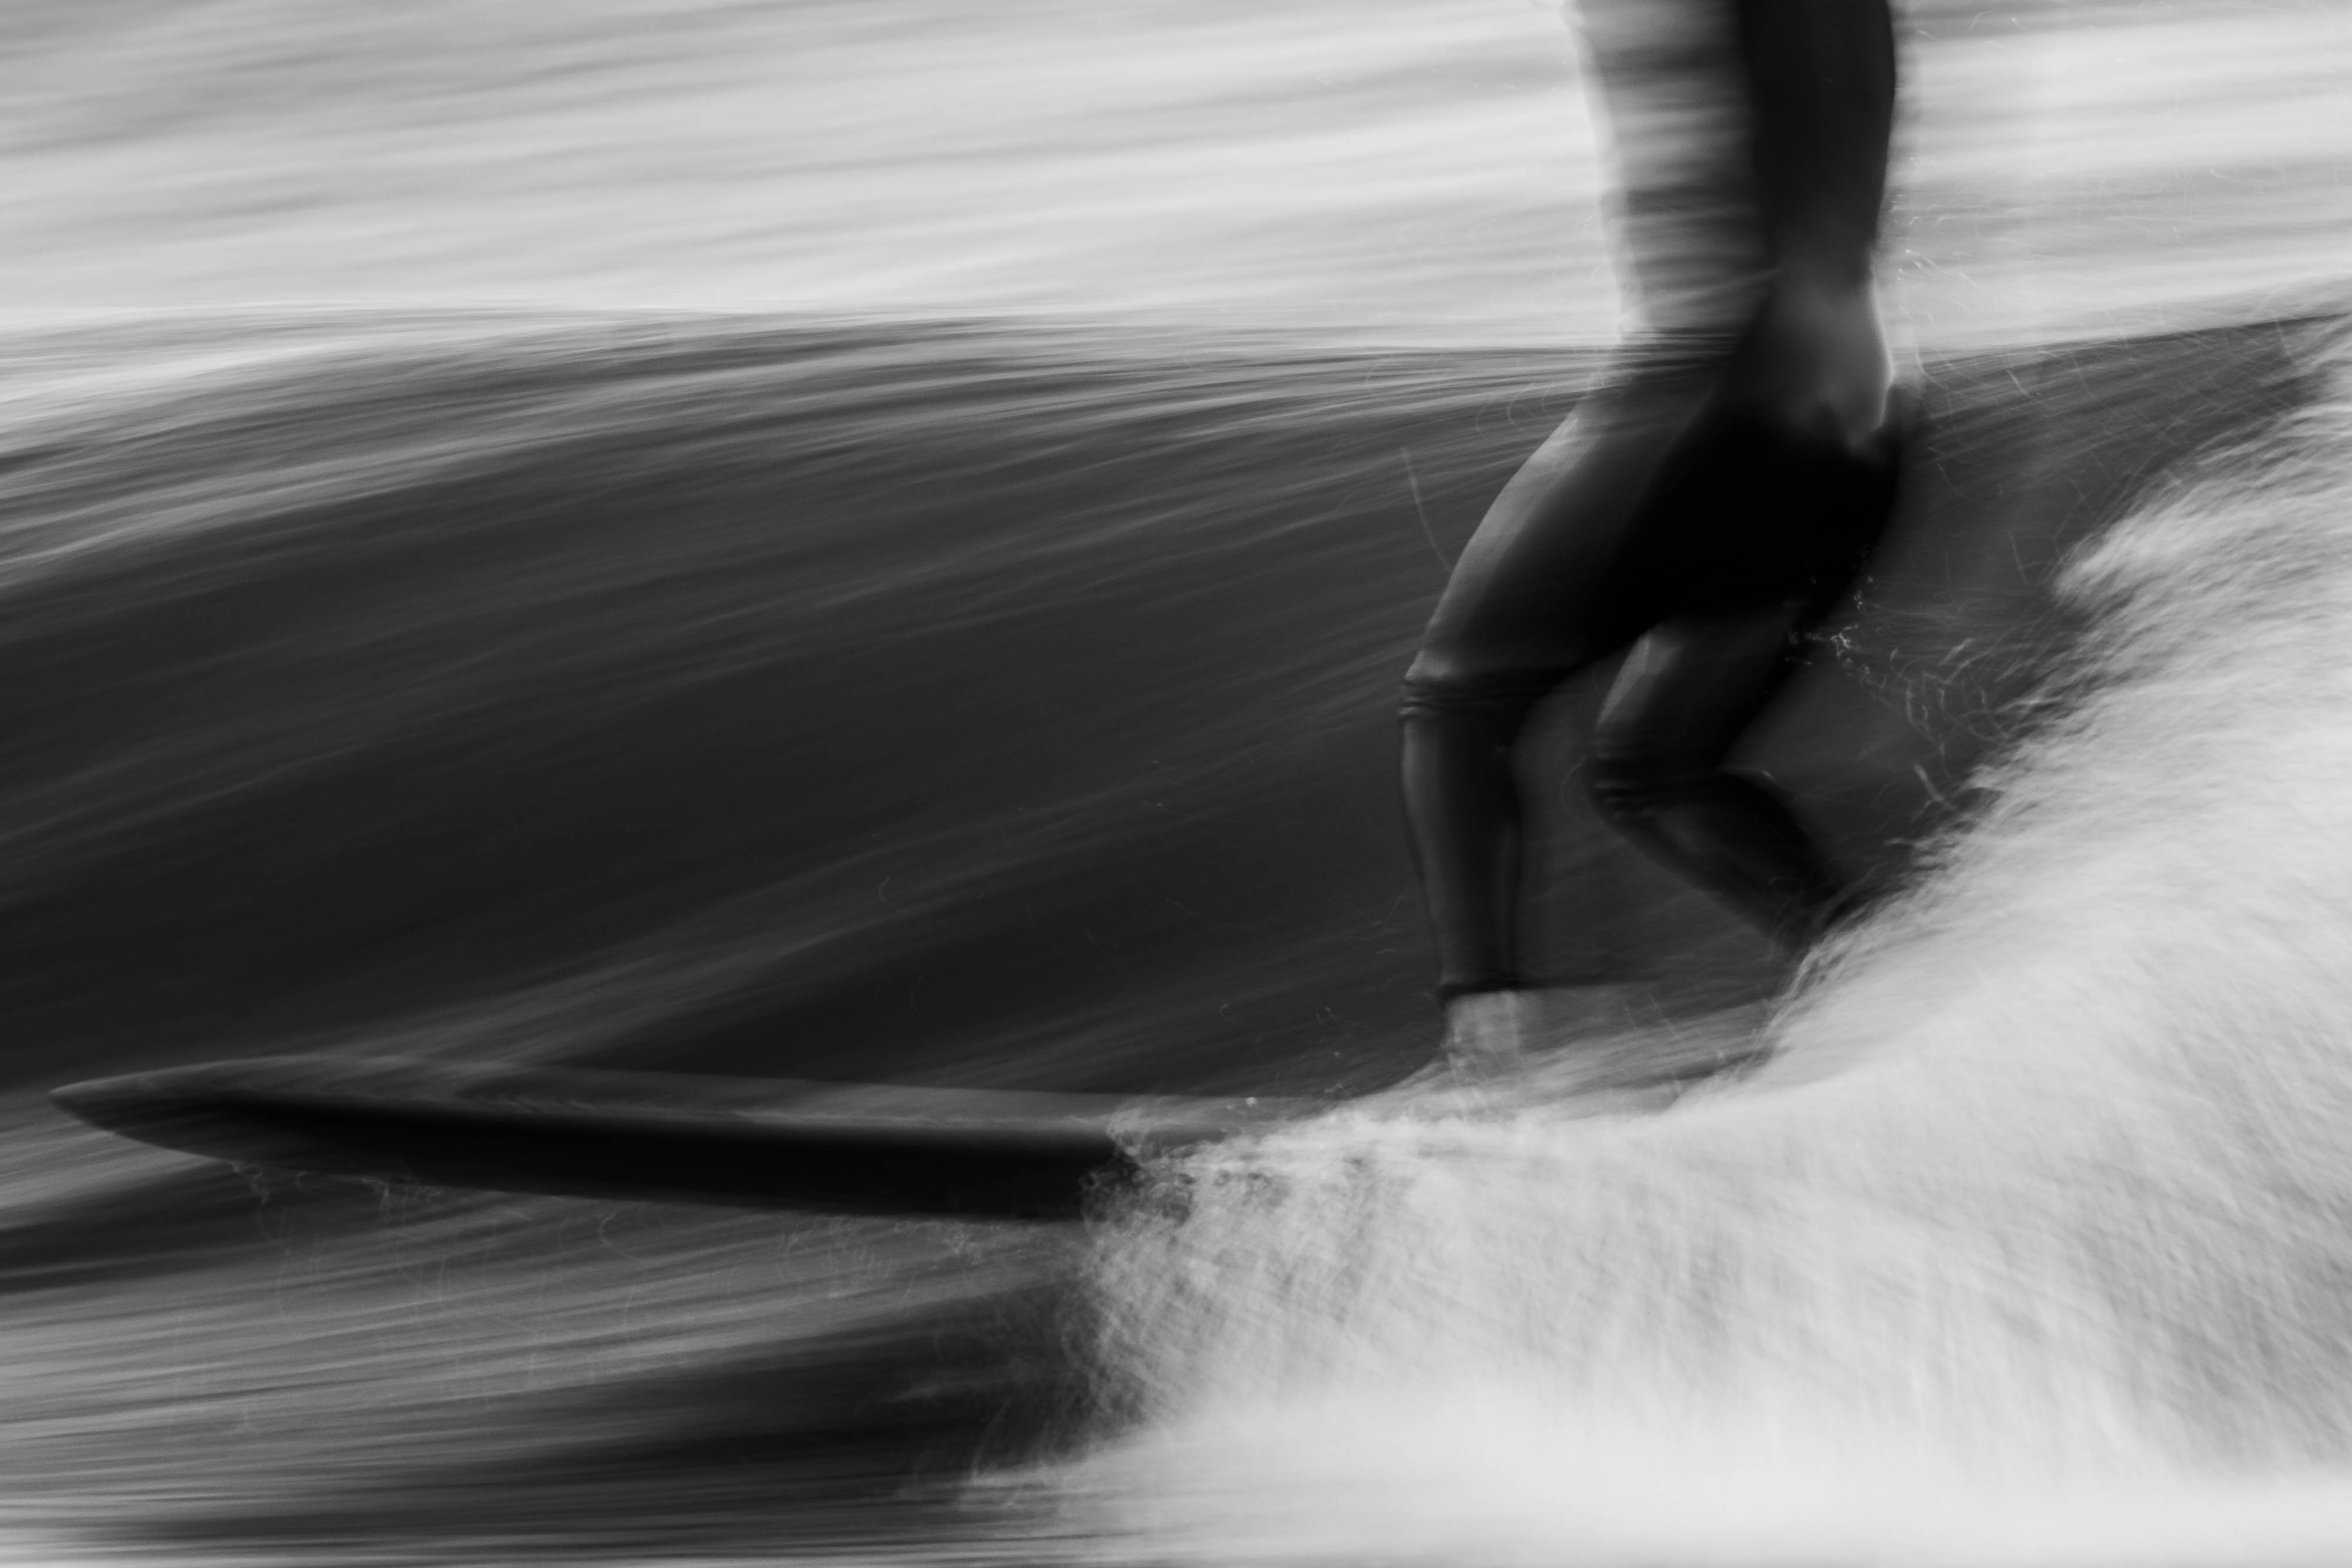 a blurry view of the legs of a surfboarder as they glide by